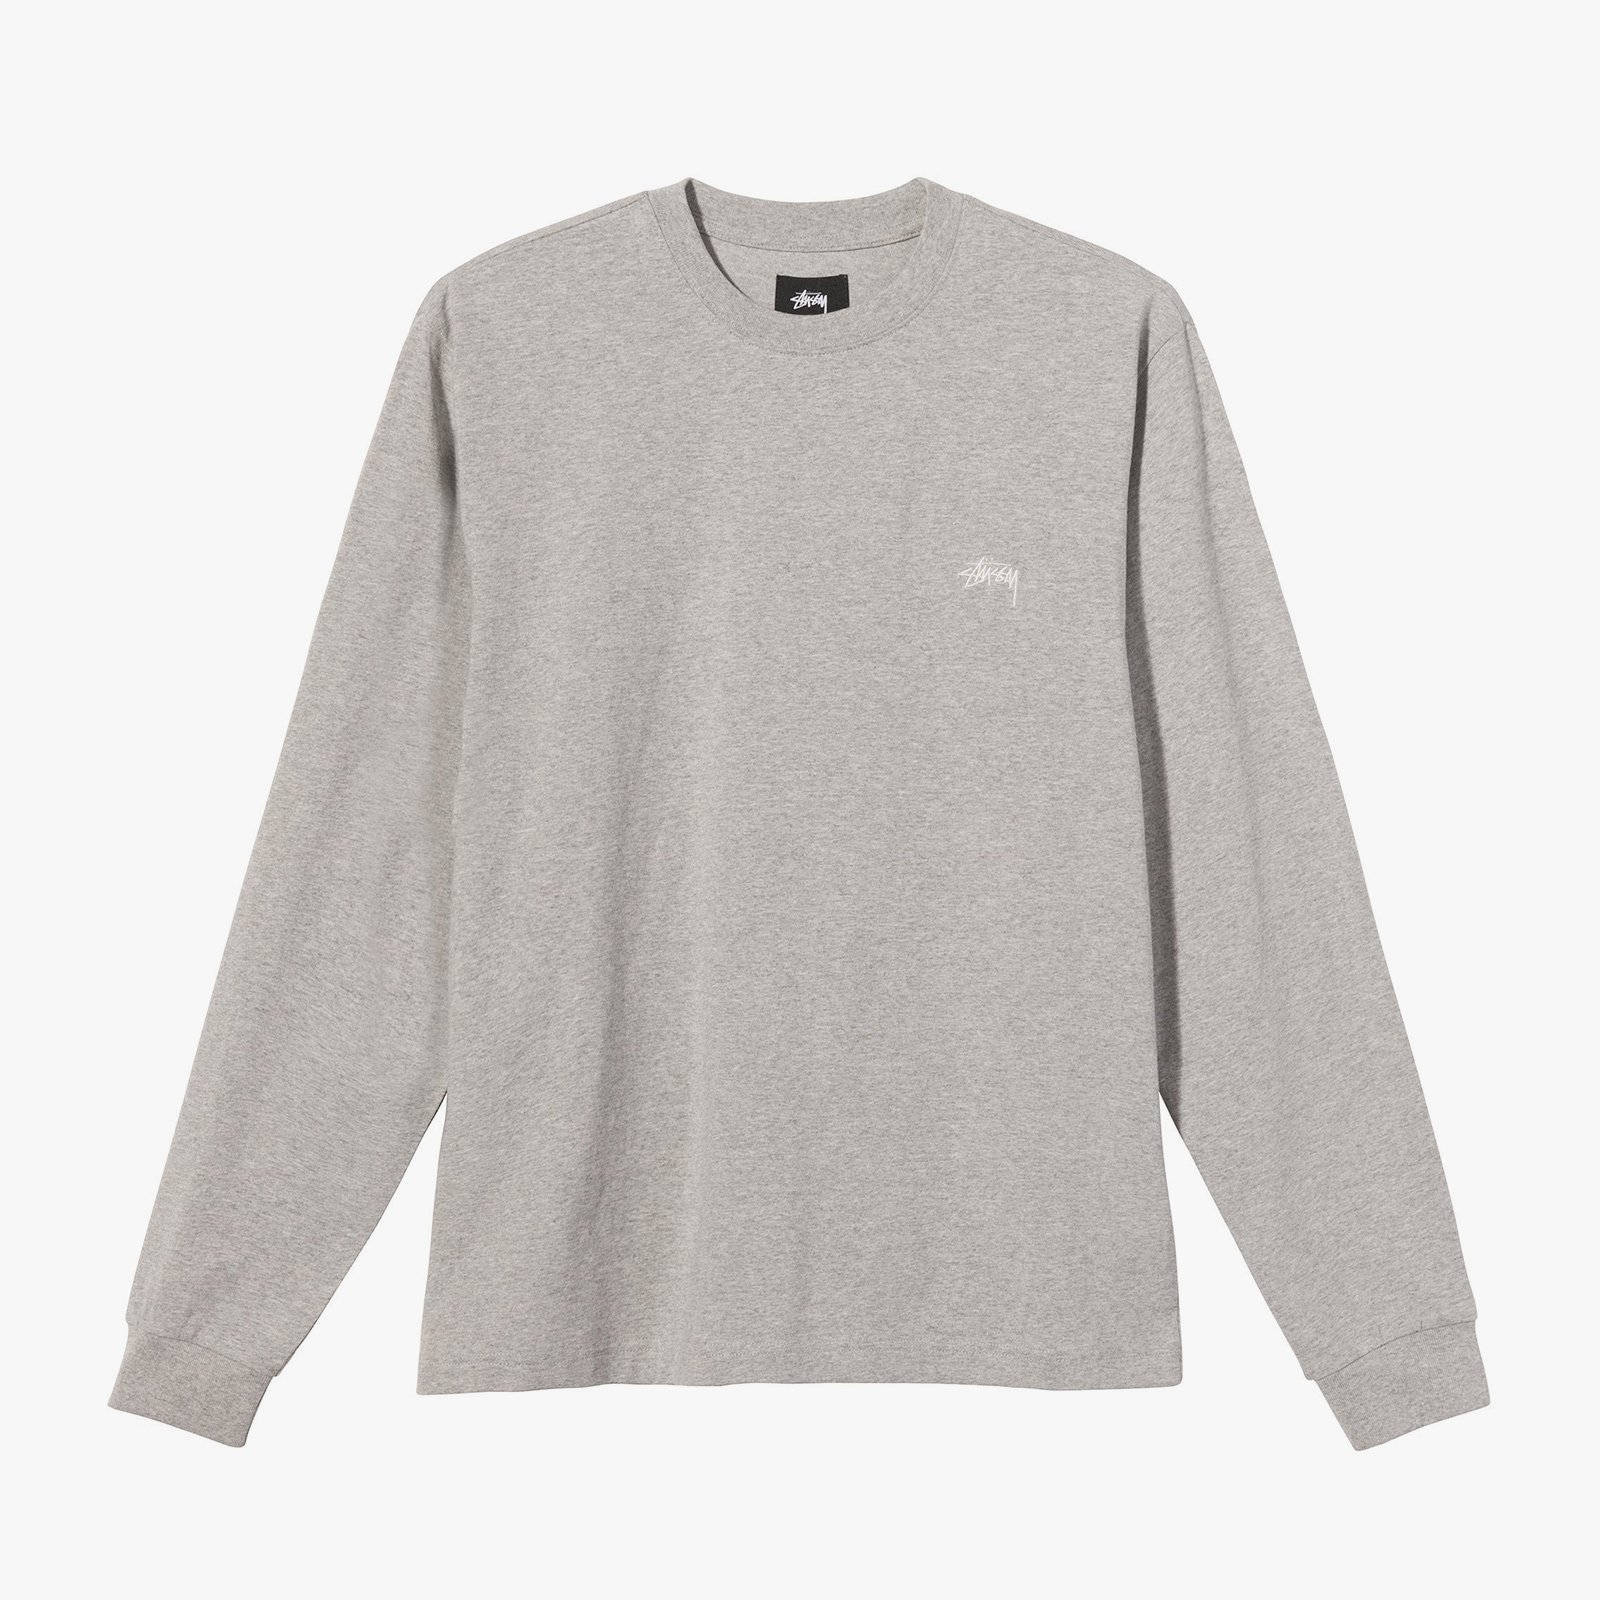 Stussy Stock Logo Long-Sleeve T-Shirt - Grey Heather | The Sole Supplier